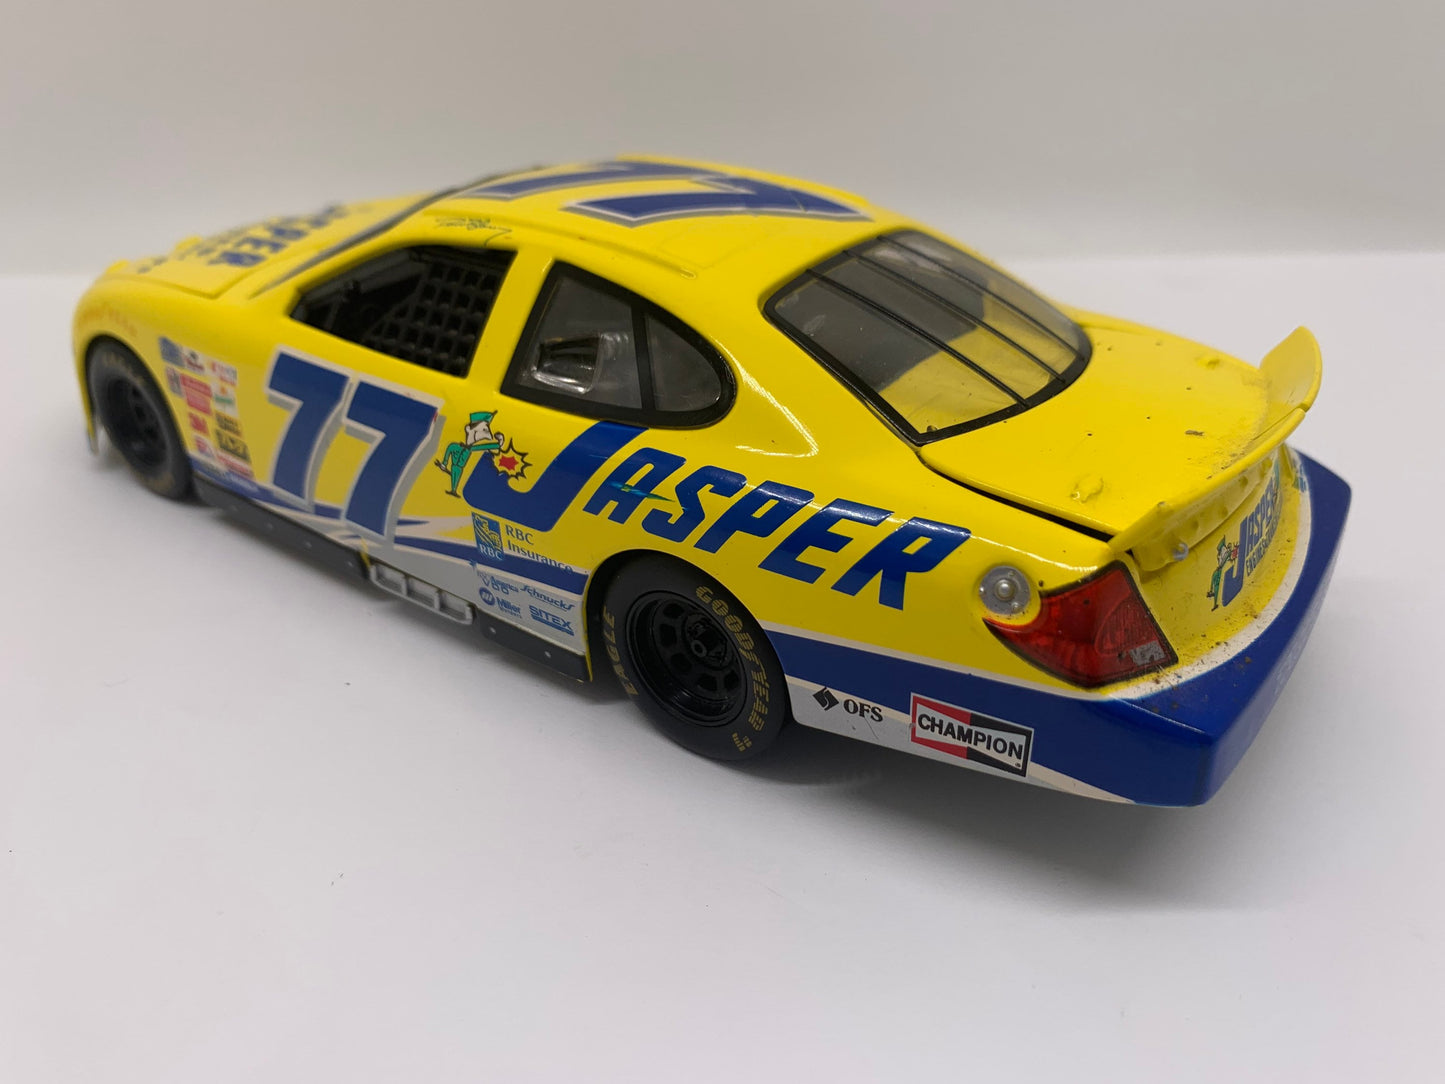 Jasper Ford Taurus Stock Car Yellow Racing Champions Collectable Replica Scale Model Toy Car Nascar Racing Car Decor Perfect Birthday Gift